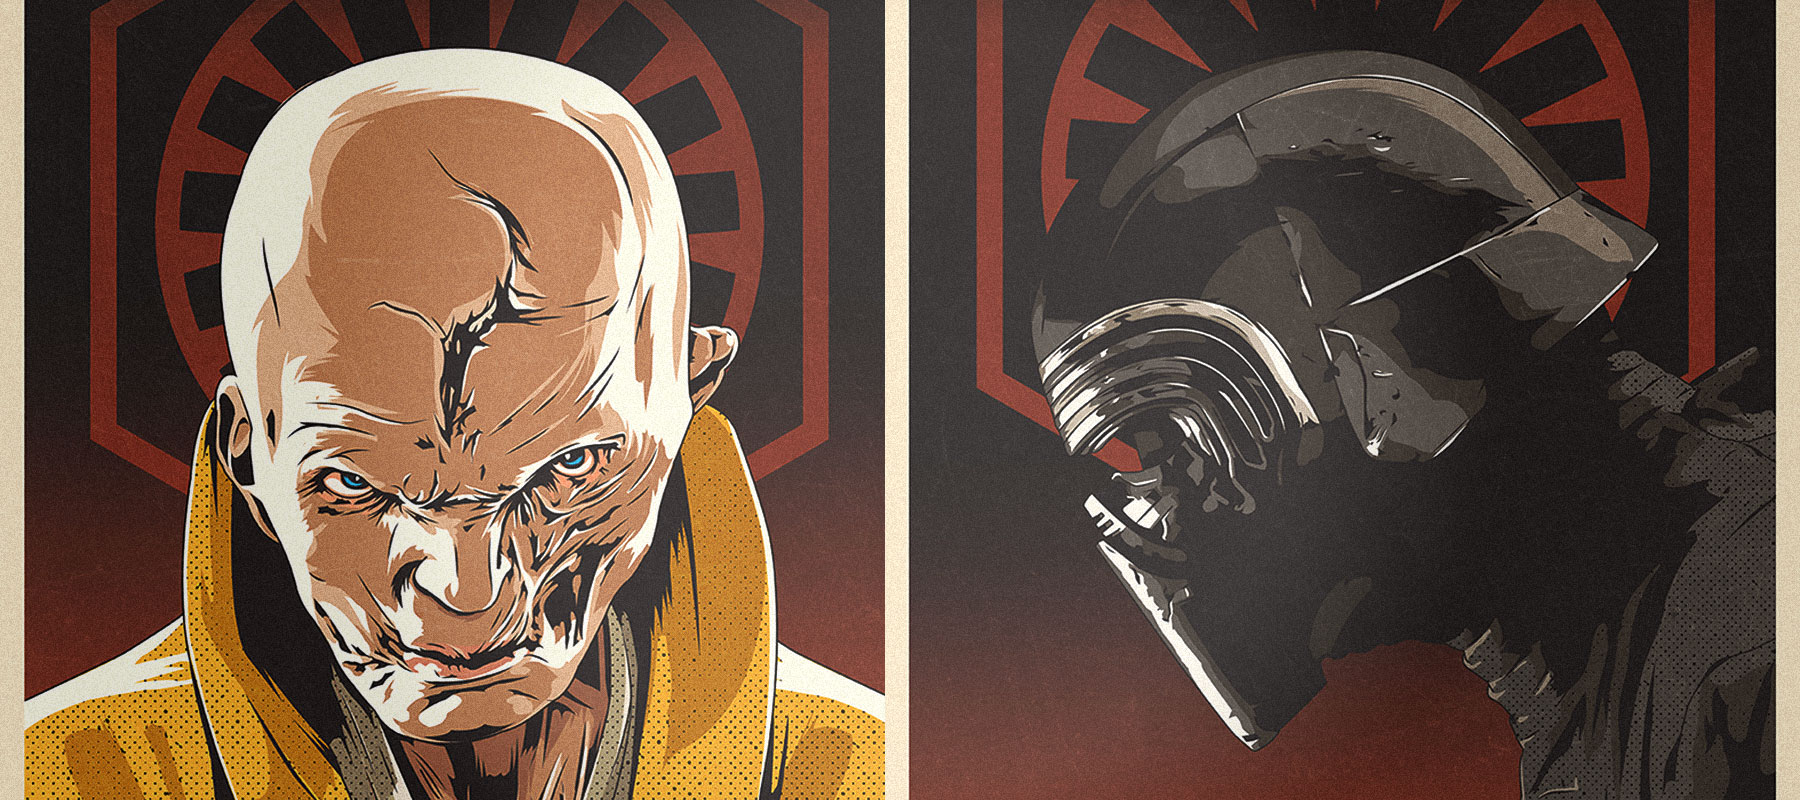 The Last Jedi Illustrations by Devin Doty